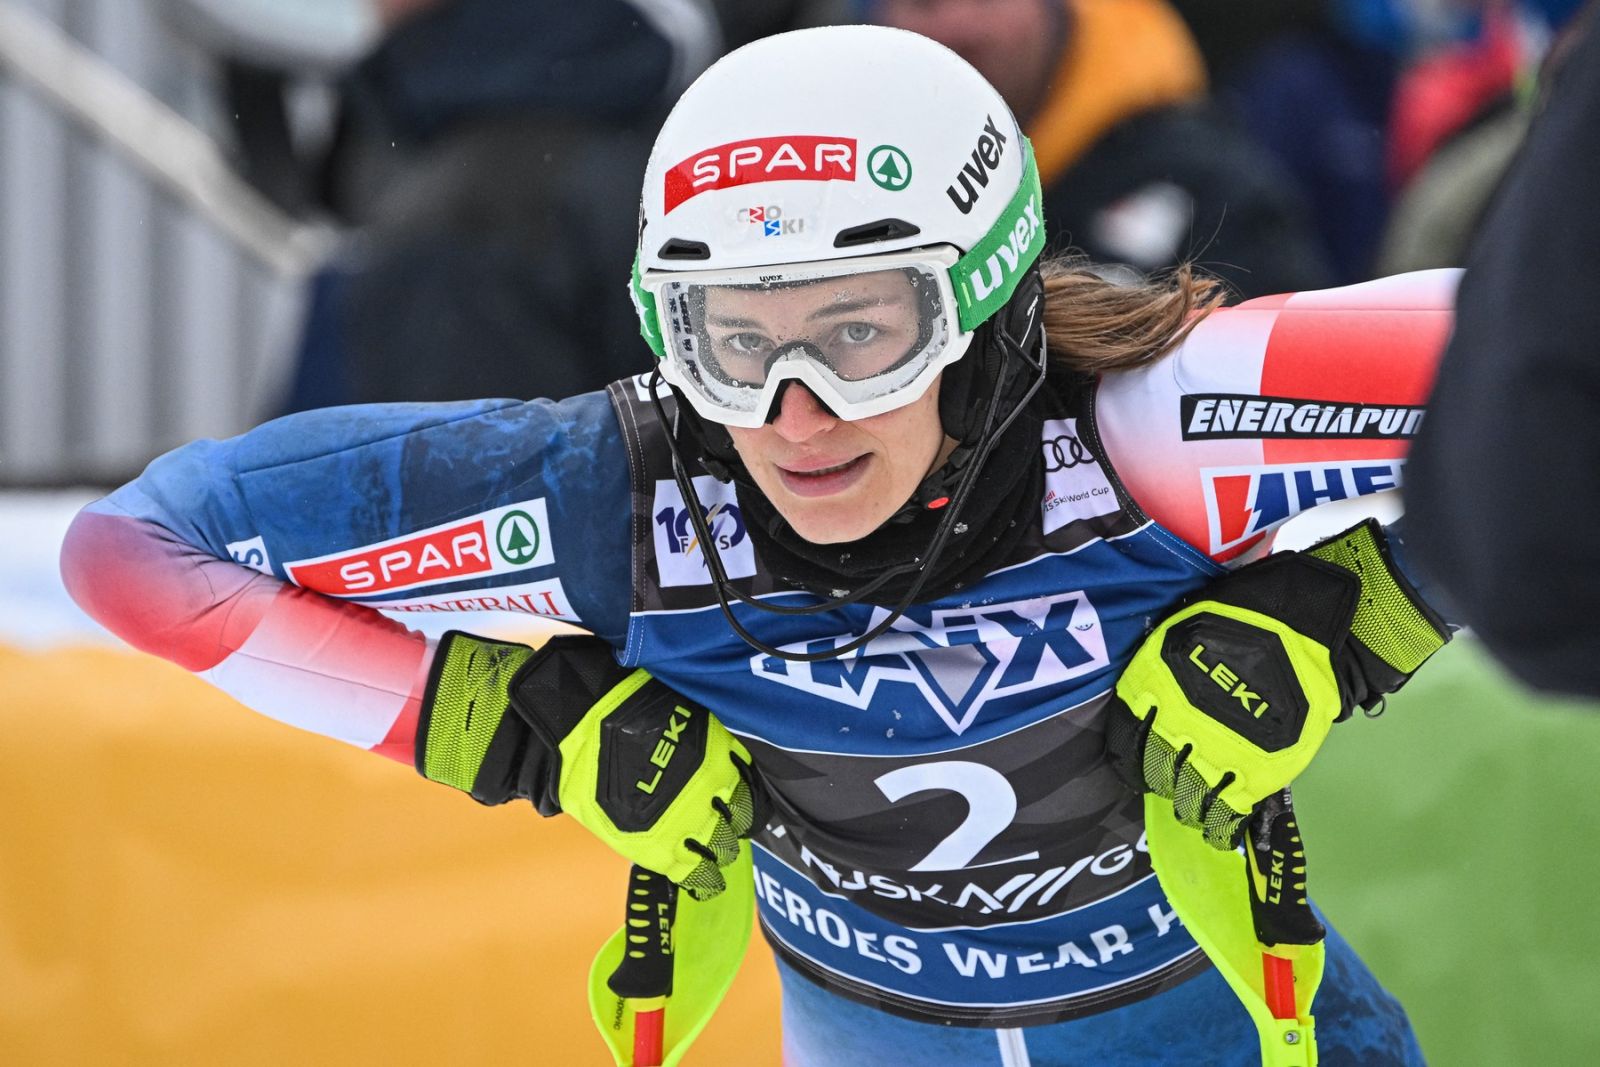 Croatia's Leona Popovic reacts in the finish area of the Slalom event of the Women’s FIS Alpine Skiing World Cup in Kranjska Gora, Slovenia on January 7, 2024.,Image: 834921494, License: Rights-managed, Restrictions: , Model Release: no, Credit line: Jure Makovec / AFP / Profimedia